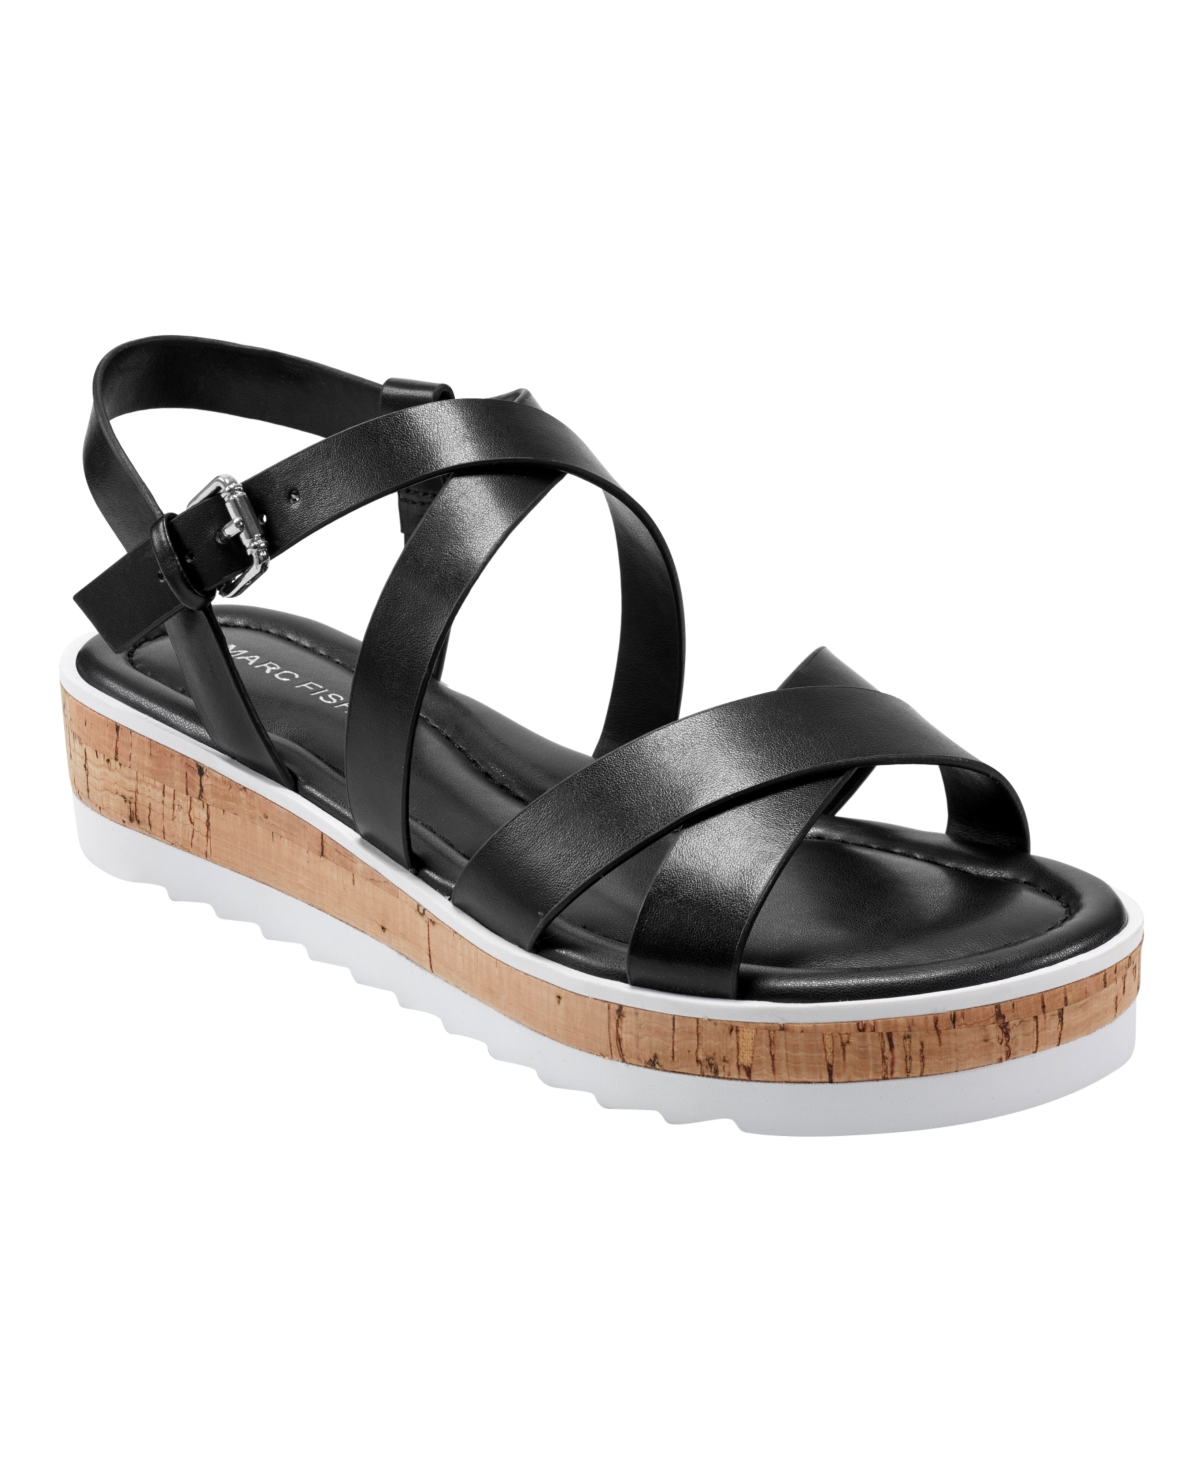 Women's Goal Open-Toe Strappy Casual Sandals - Dark Natural